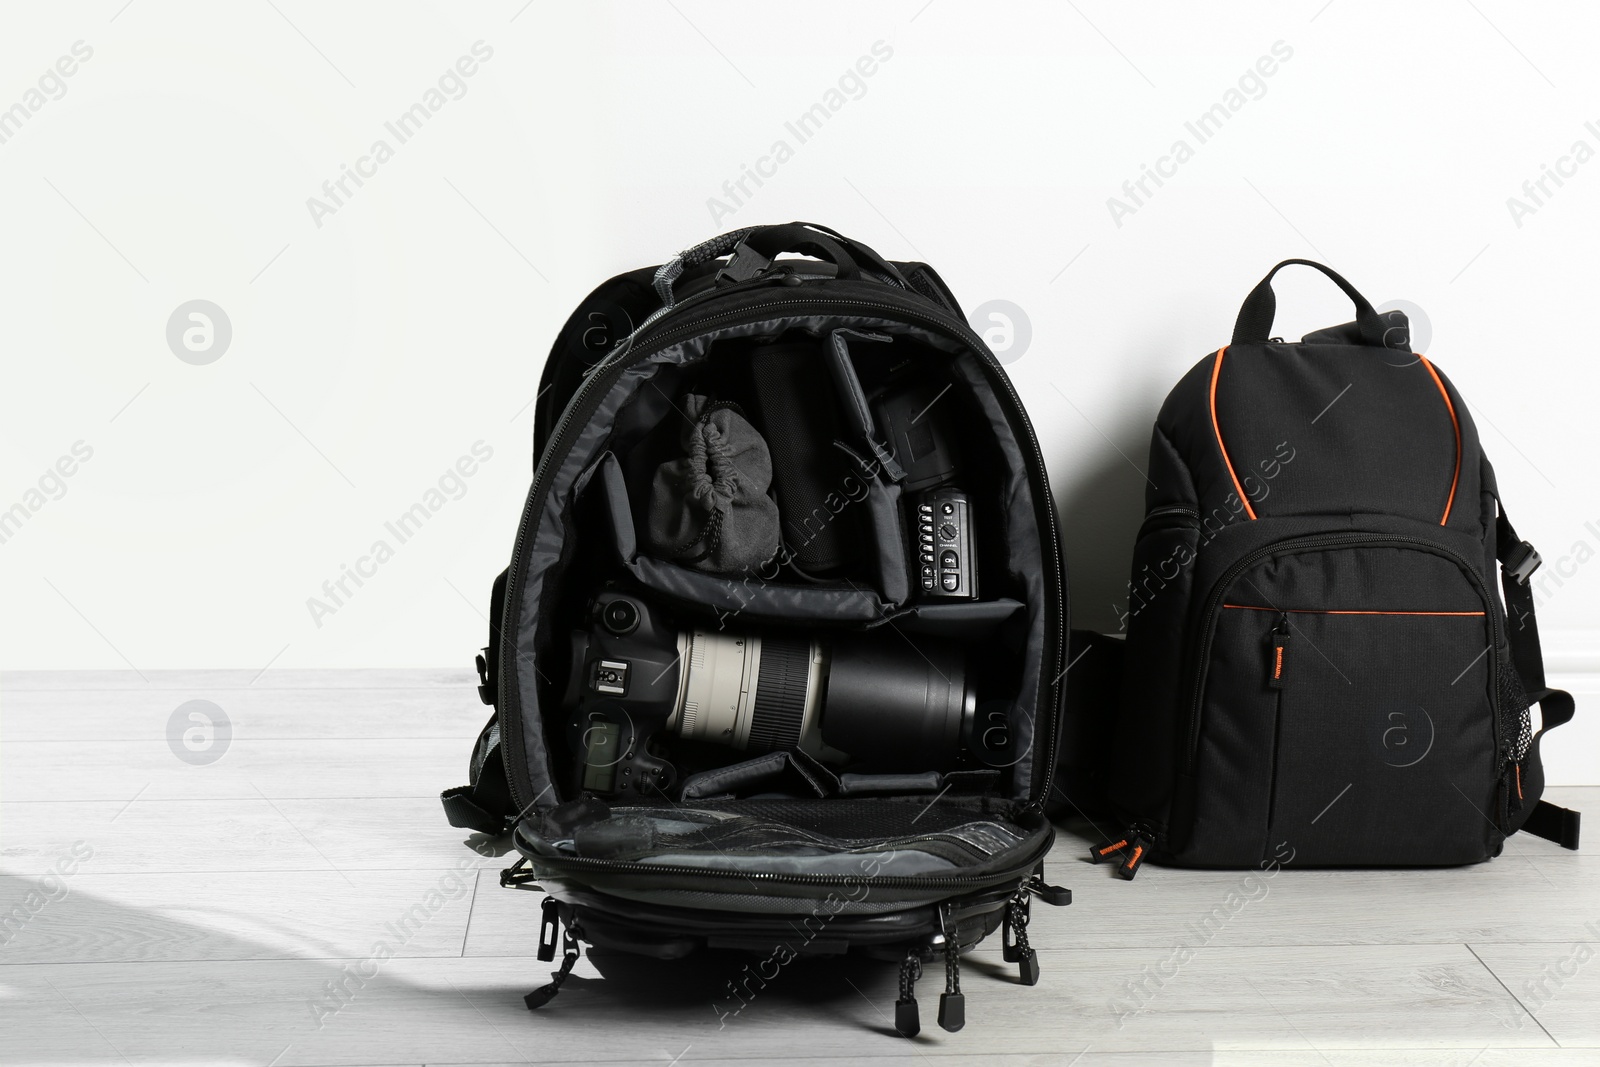 Photo of Backpacks with professional photographer's equipment on floor indoors